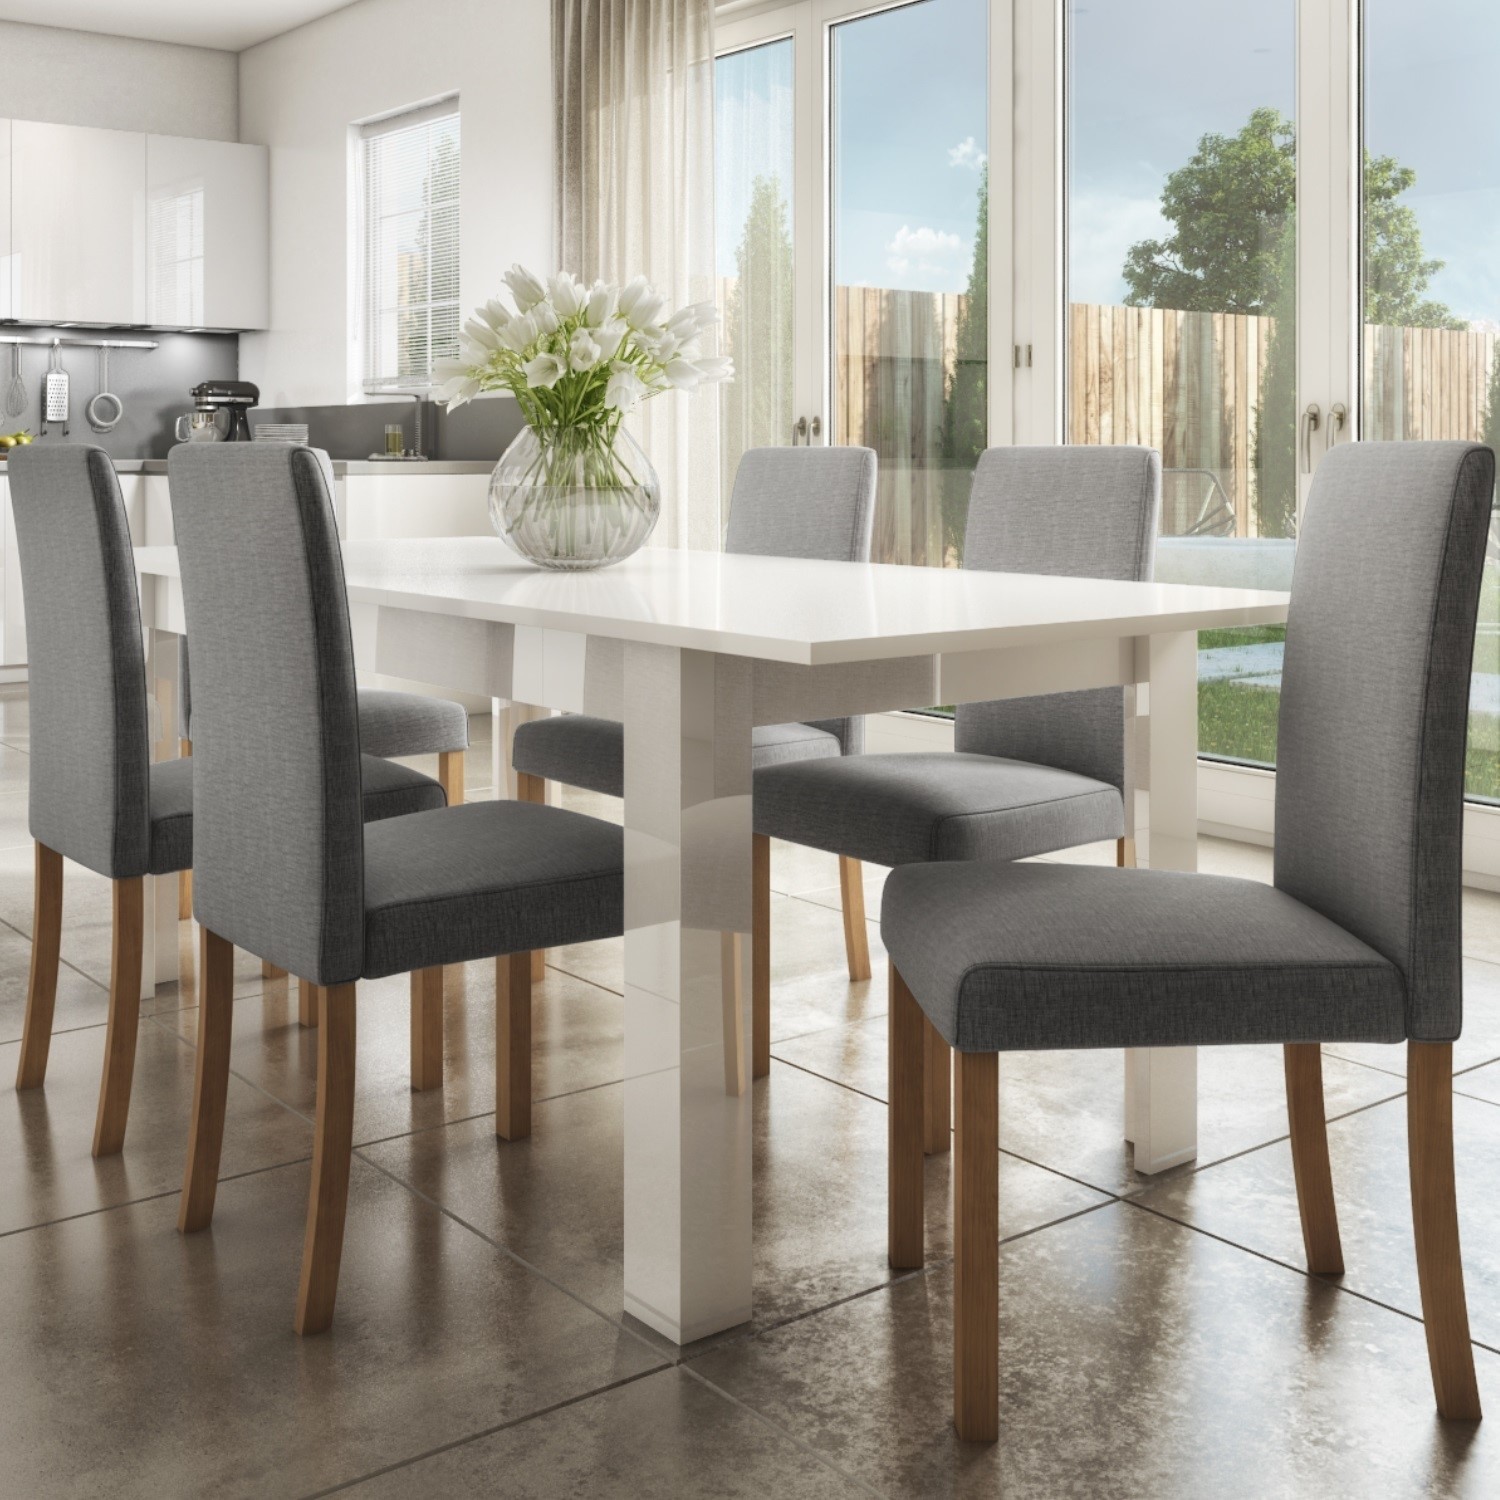 Extendable Dining Table In White High Gloss With 6 Grey Chairs Vivienne New Haven Furniture123